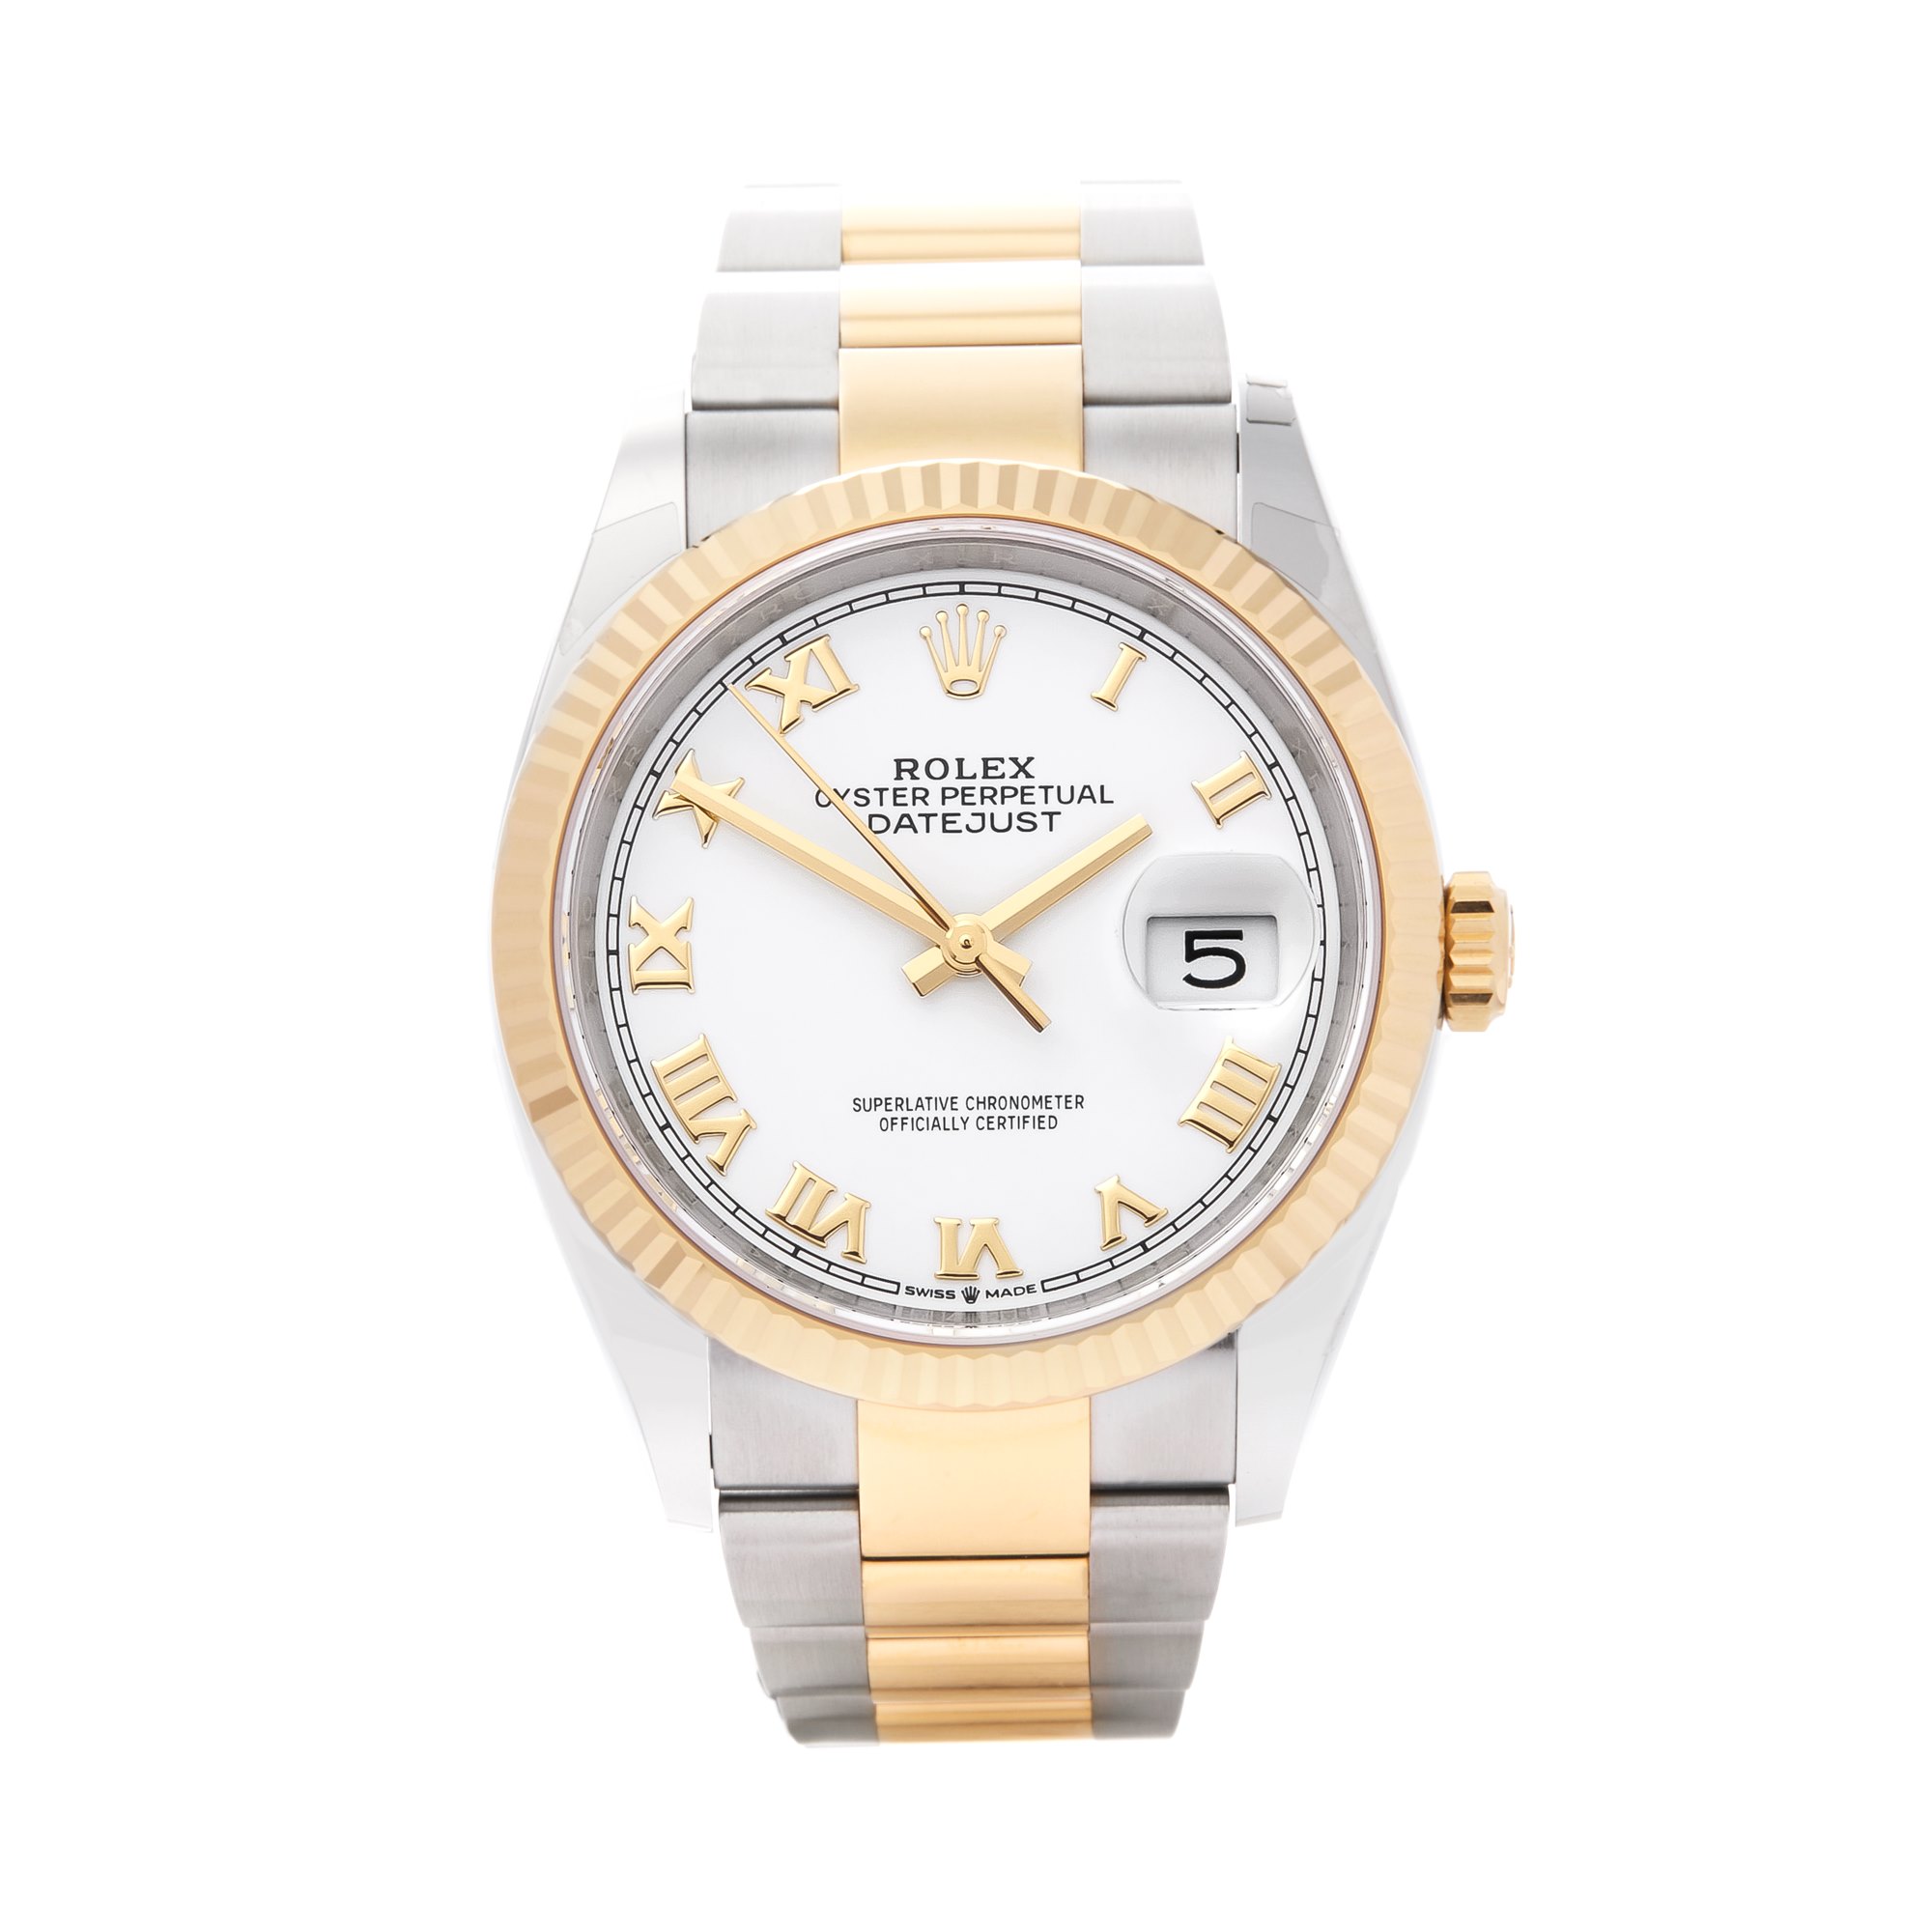 Rolex Datejust 36 Yellow Gold & Stainless Steel 126233